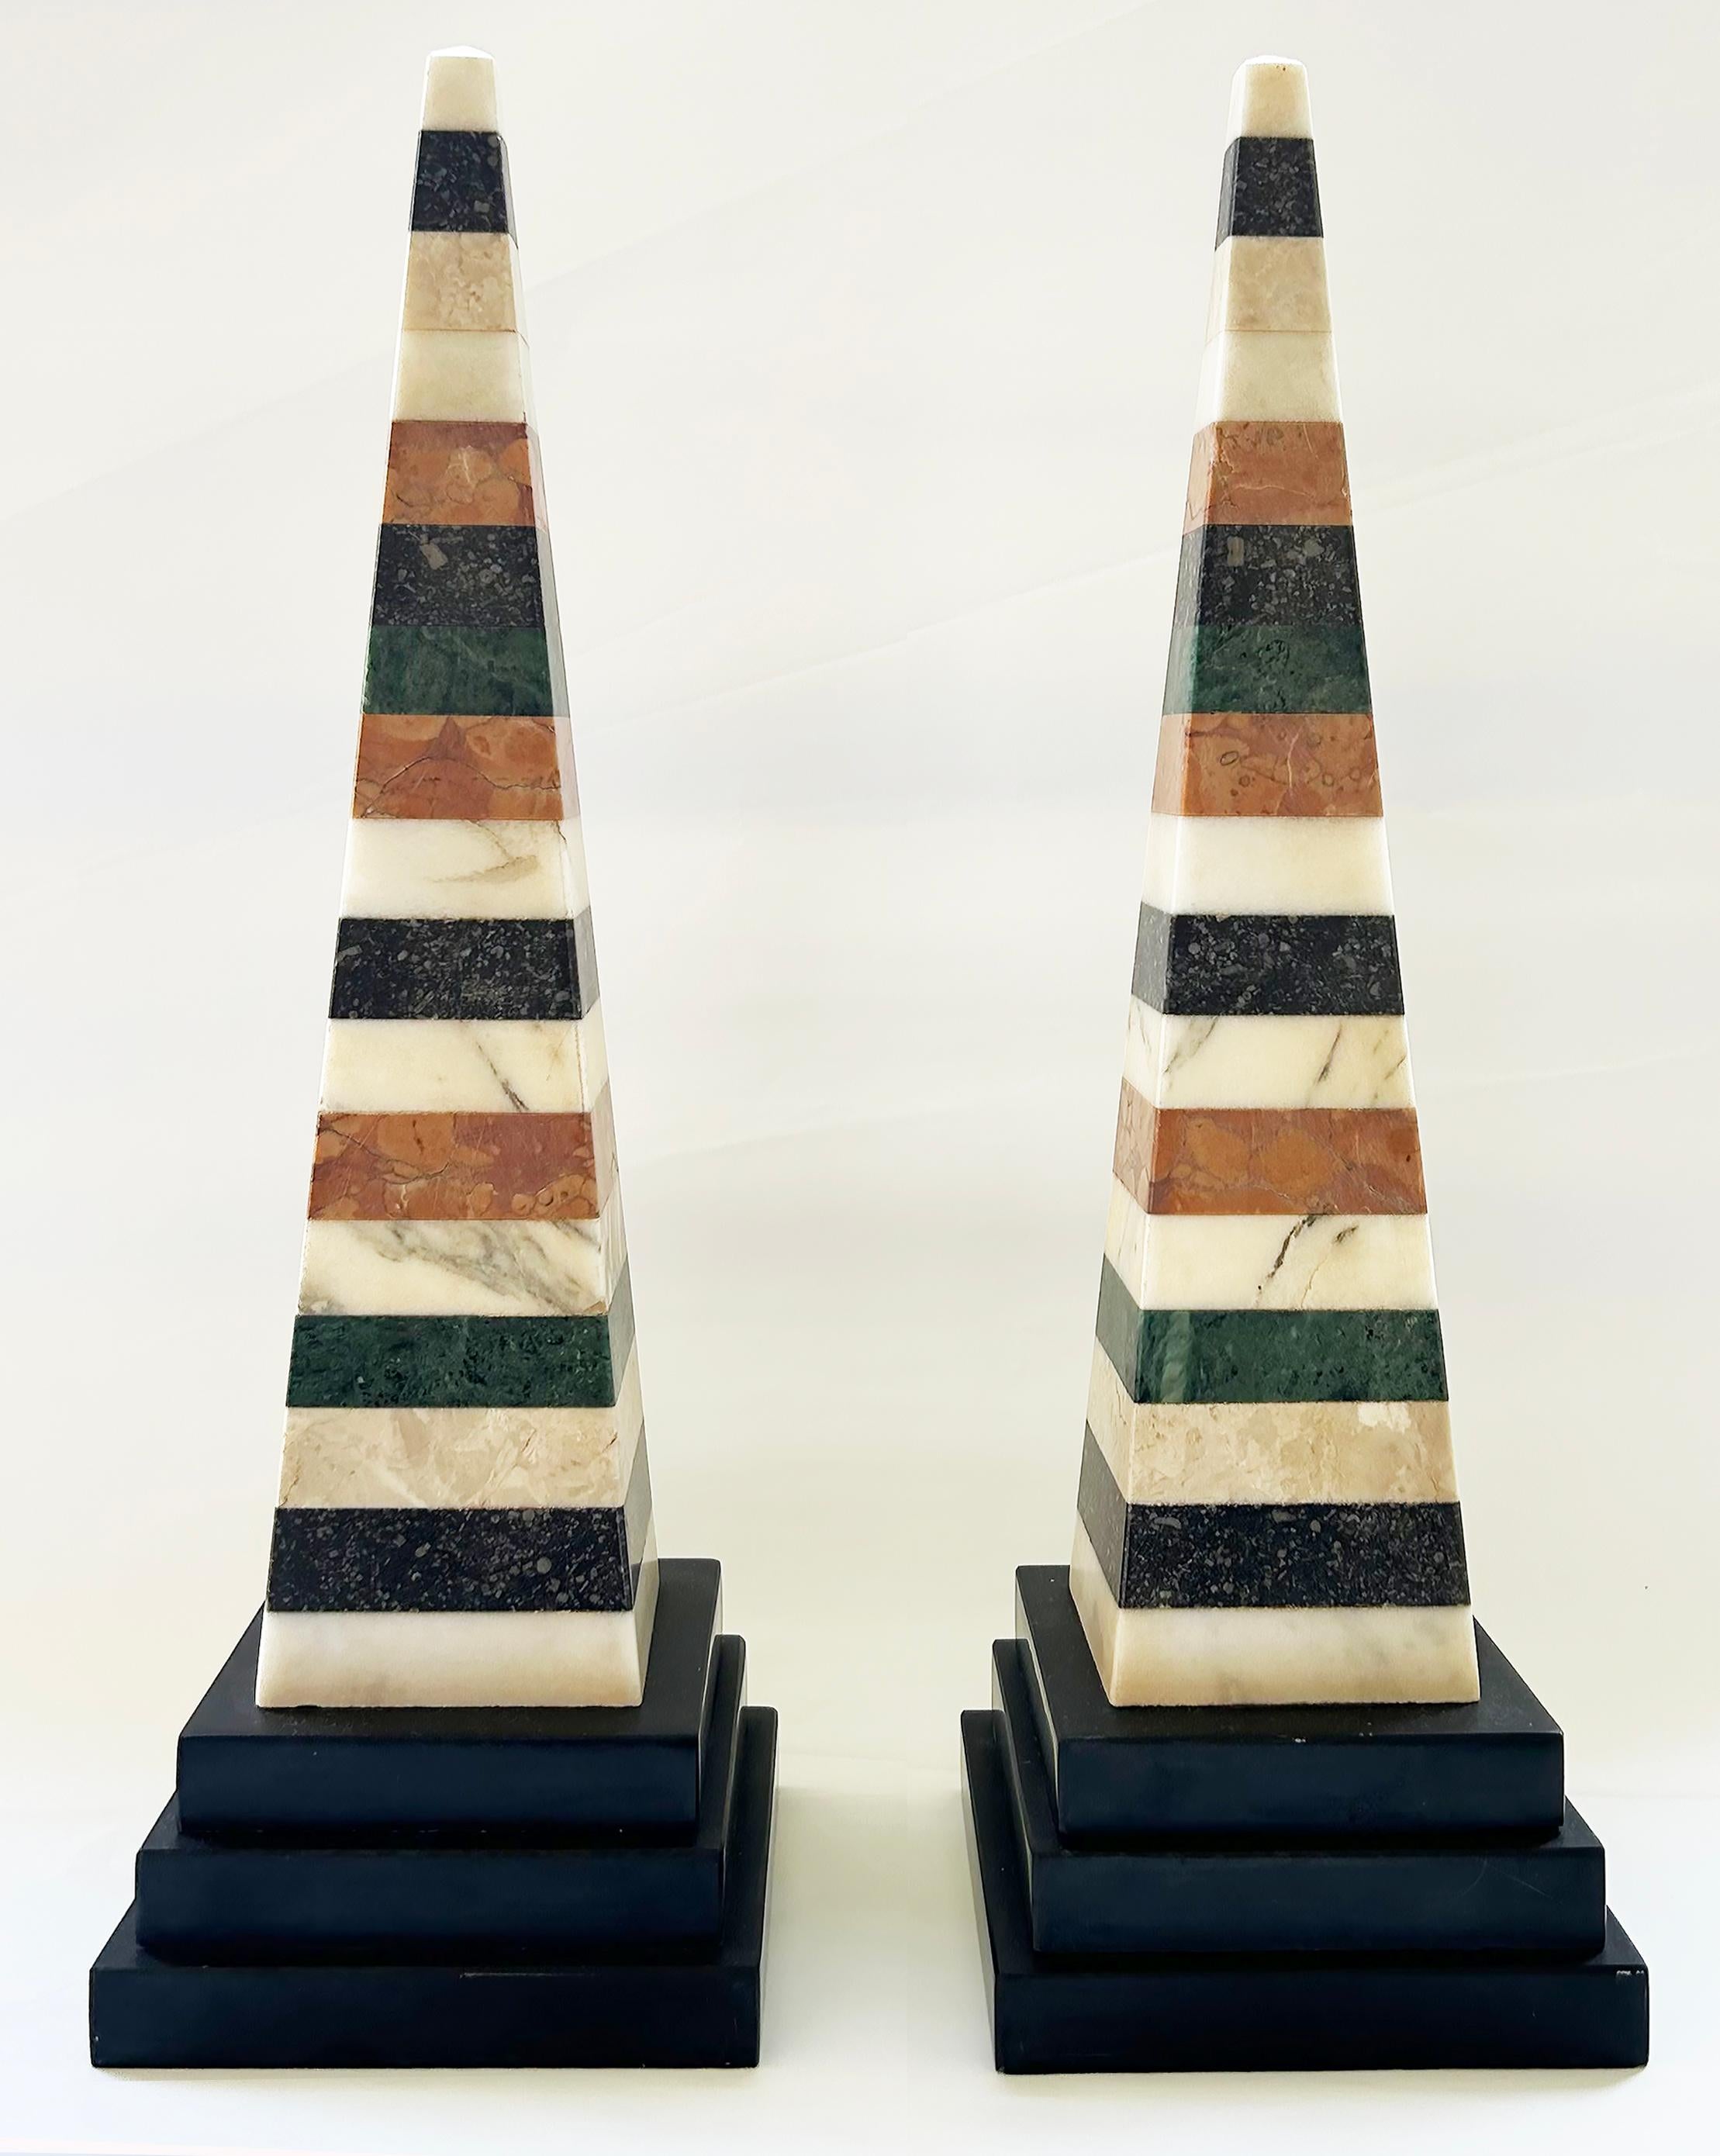 Grand Tour Italian Specimen Marble Pair of Lovely Obelisks

Offered for sale is a wonderful pair of Italian grand tour period obelisks created from stacked marble pieces. The obelisks are striking and elegant and will make lovely additions to a